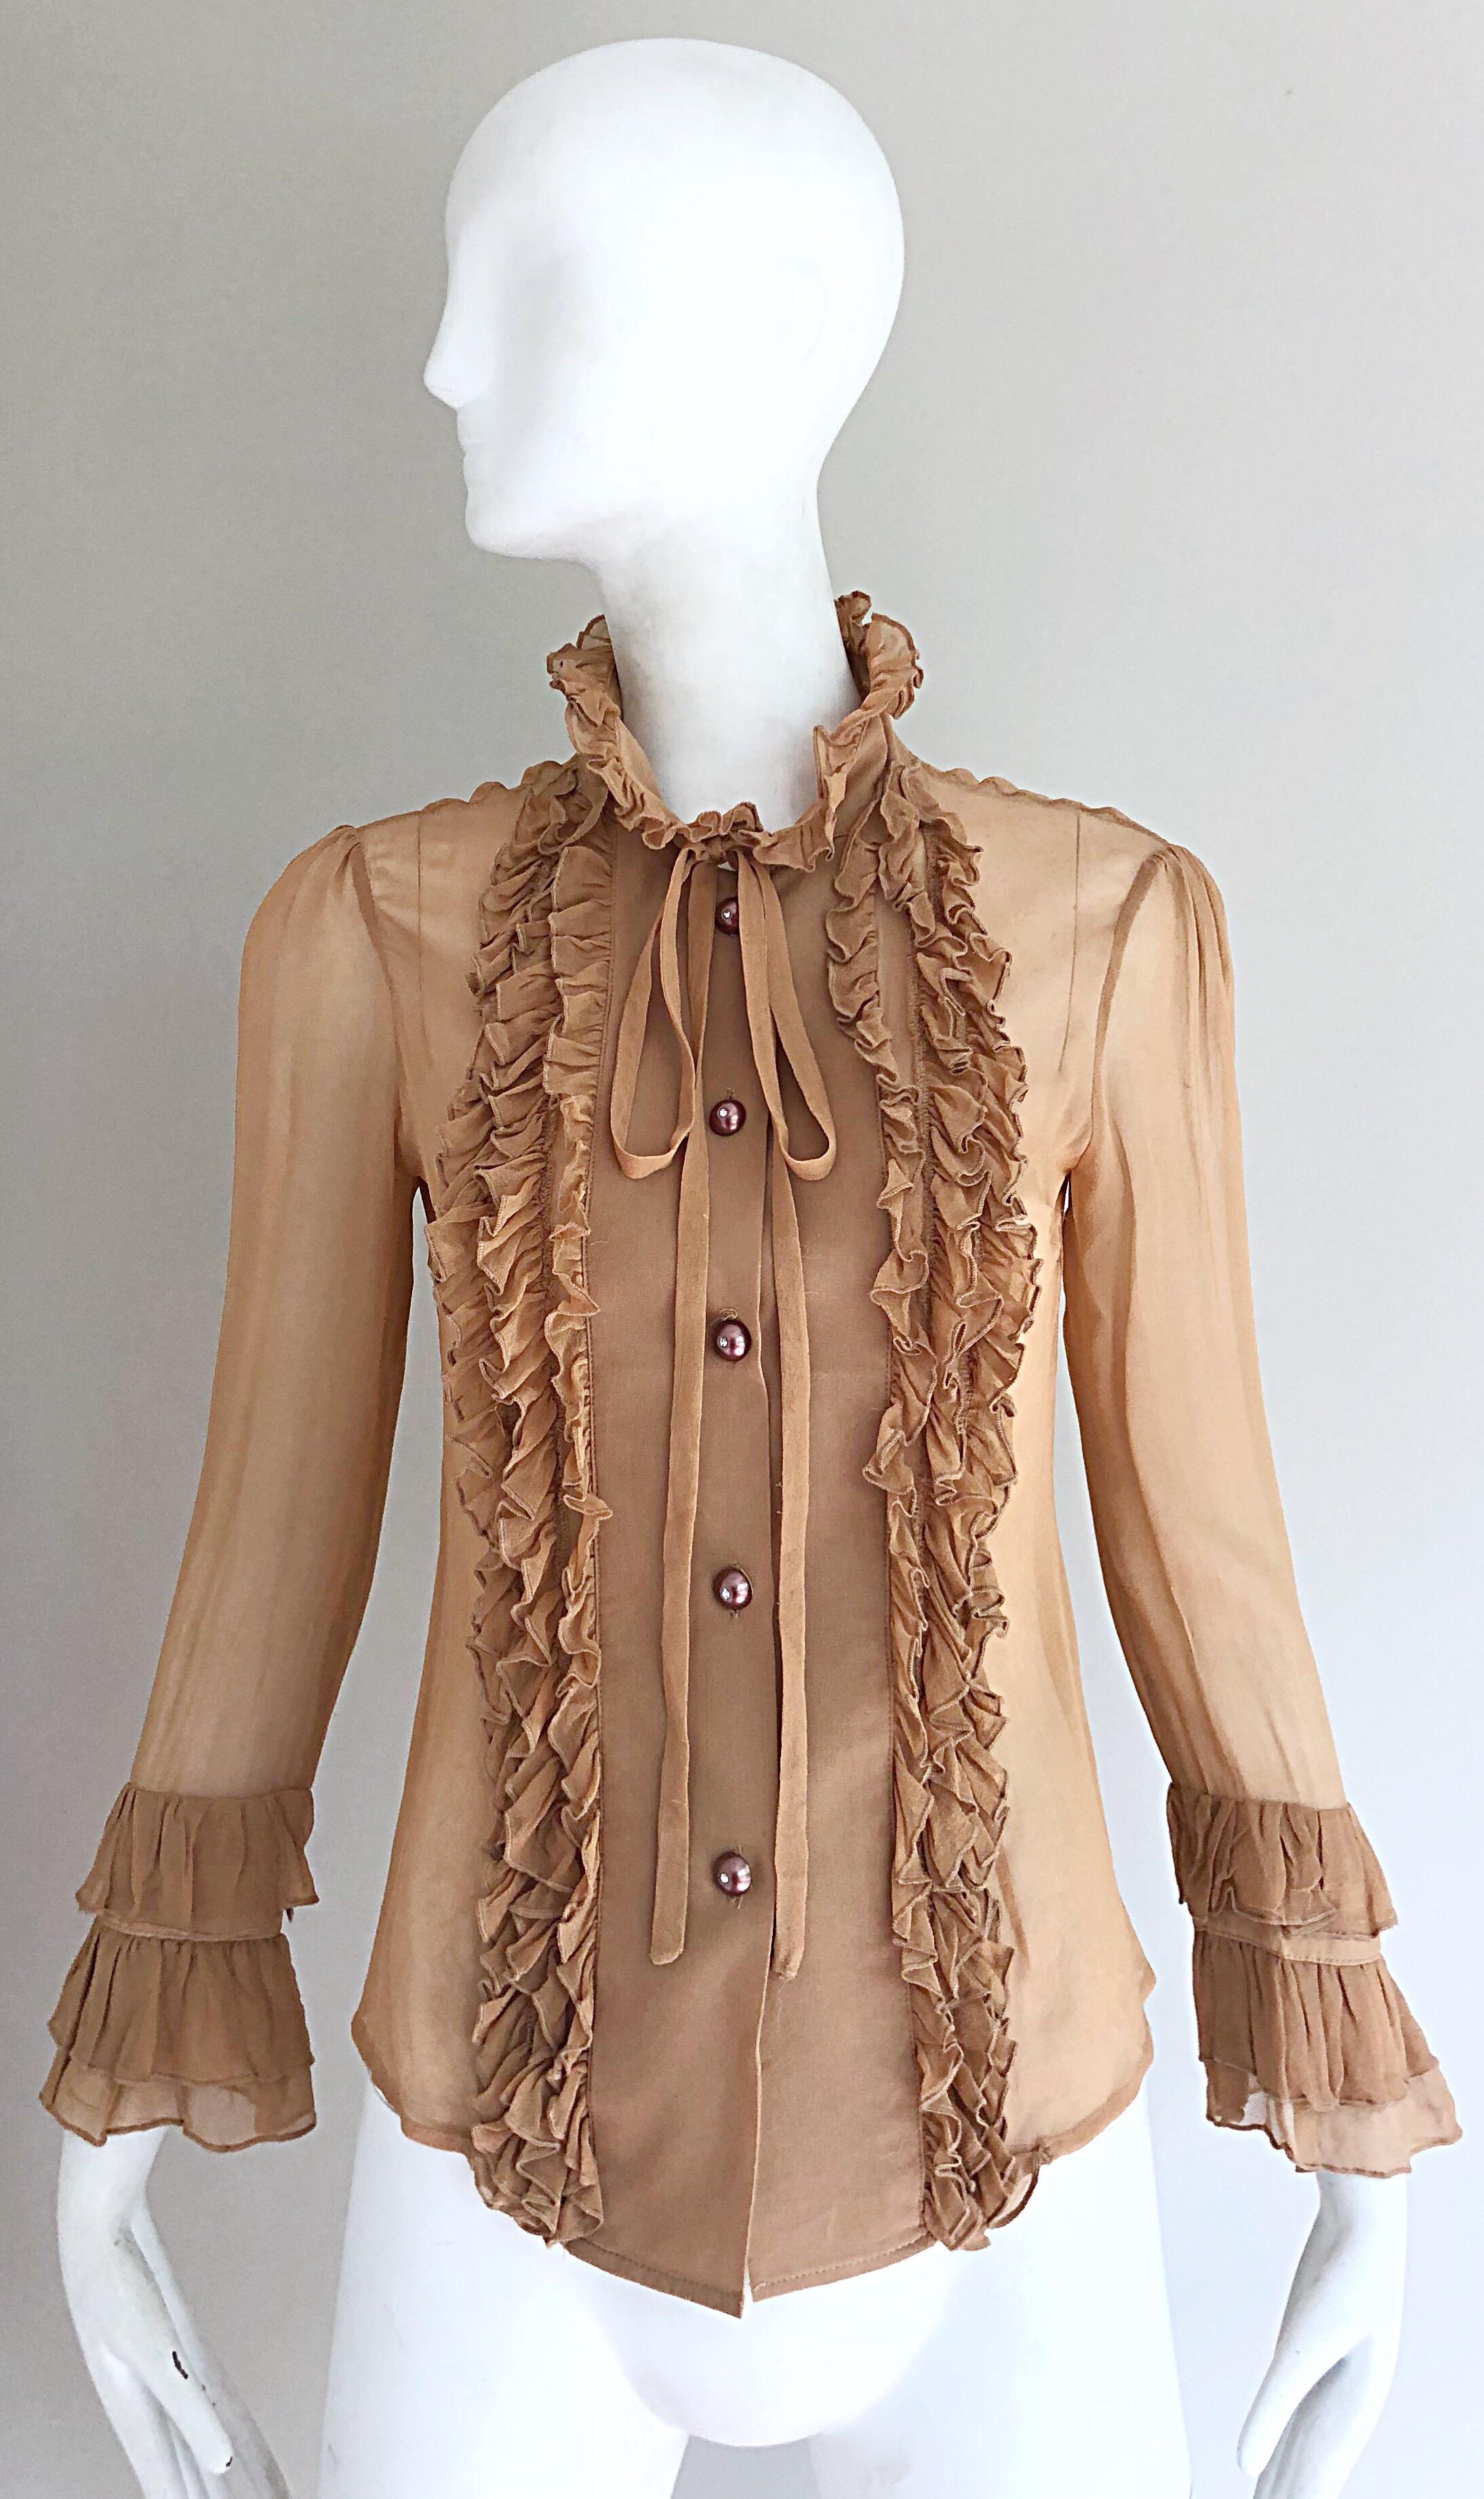 Extraordinary late 1990s CHLOE nude / tan silk chiffon sheer Victorian style shirt! Features ruffles down each side. Rhinestone encrusted buttons down the center bodice. Chic ties at each collar tie to a bo at center collar. A super versatile staple